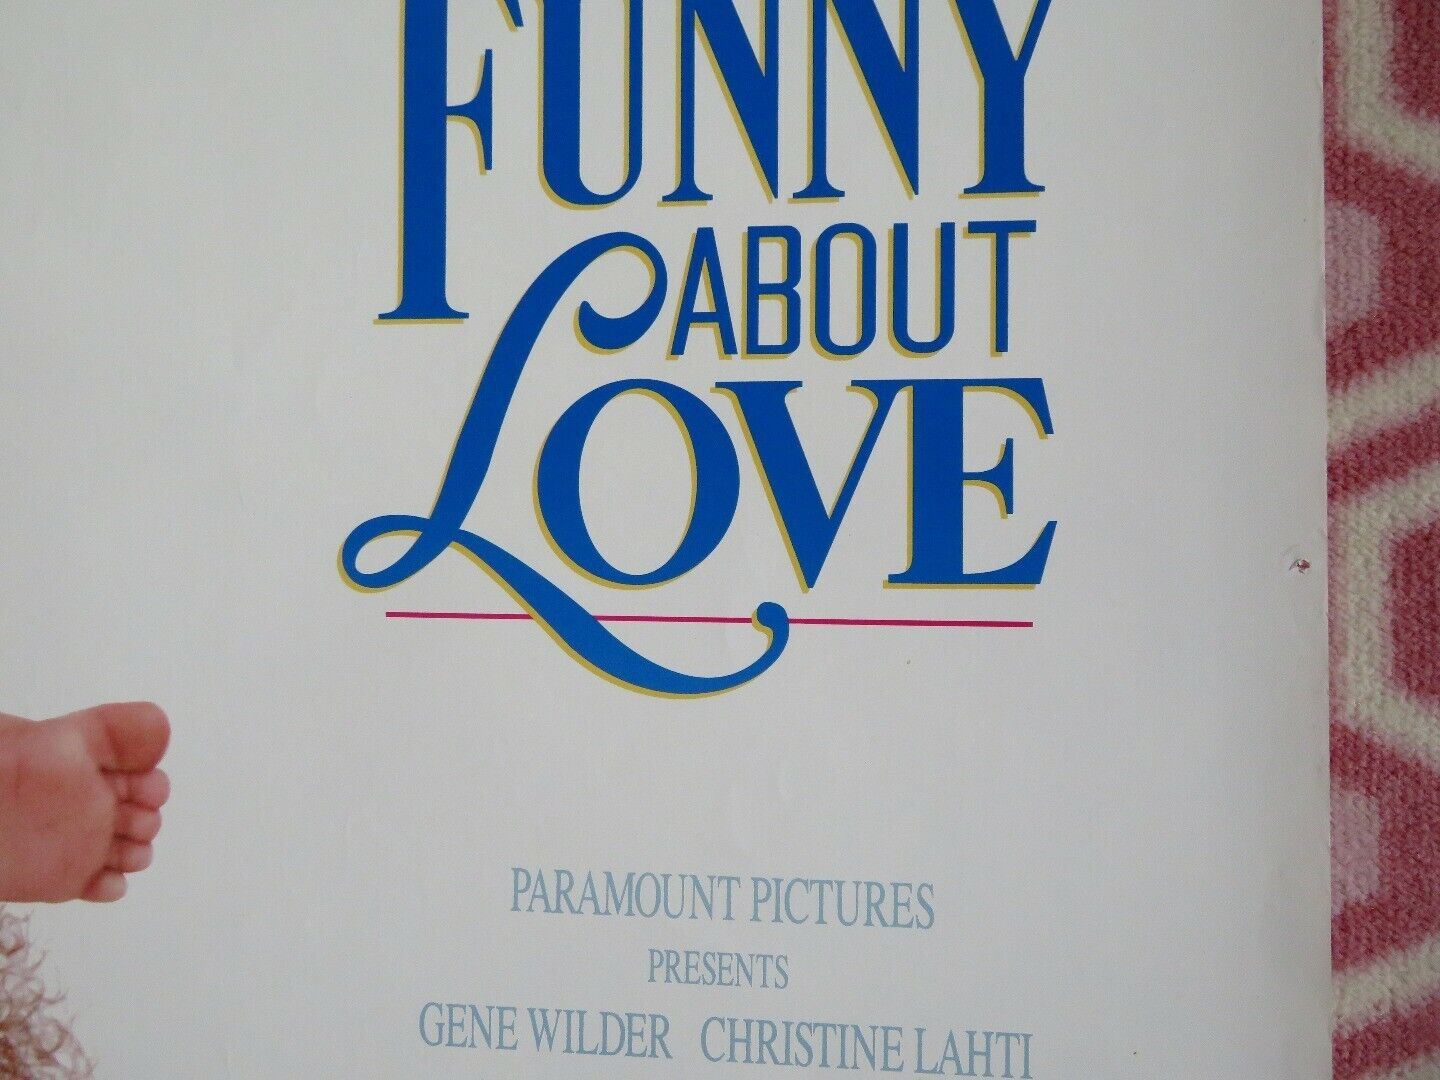 FUNNY ABOUT LOVE US ONE SHEET ROLLED POSTER GENE WILDER 1990